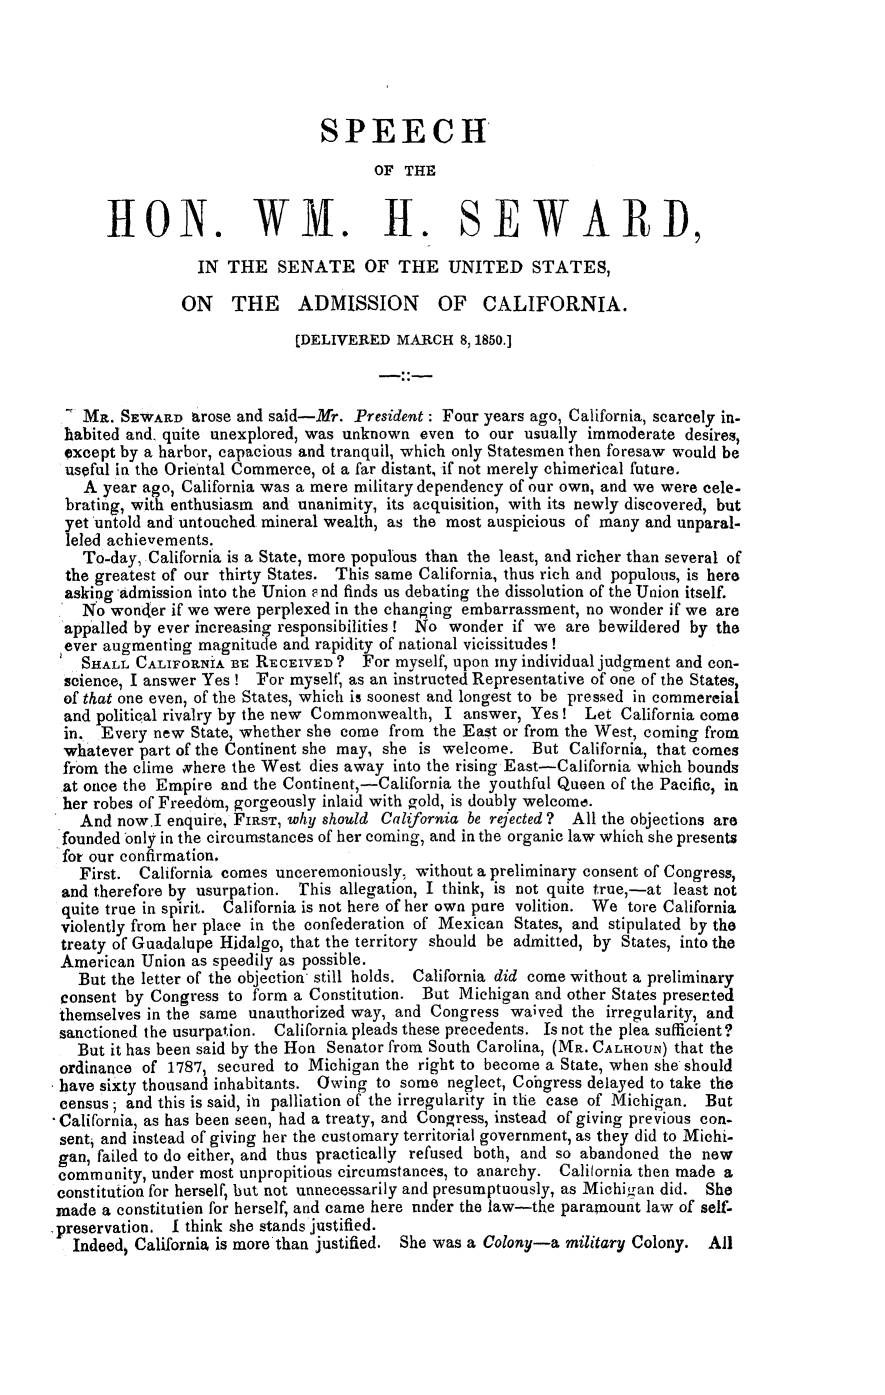 handle is hein.slavery/wmseadca0001 and id is 1 raw text is: 





                                SPEECH
                                       OF THE


      HON. WVI. H. SE WAR I),

                 IN  THE   SENATE OF THE UNITED STATES,

               ON THE ADMISSION OF CALIFORNIA.

                             [DELIVERED  MARCH   8,1850.]



   MR.  SEWARD   arose and said-Mr. President: Four years ago, California, scarcely in-
 habited and. quite unexplored, was unknown even  to our usually immoderate desires,
 except by a harbor, capacious and tranquil, which only Statesmen then foresaw would be
 useful in the Oriental Commerce, of a far distant, if not merely chimerical future.
   A  year ago, California was a mere military dependency of our own, and we were cele-
 brating, with enthusiasm and unanimity, its acquisition, with its newly discovered, but
 yet untold and untouched mineral wealth, as the most auspicious of many and unparal-
 leled achievements.
   To-day, California is a State, more populous than the least, and richer than several of
 the greatest of our thirty States. This same California, thus rich and populous, is here
 asking admission into the Union e nd finds us debating the dissolution of the Union itself.
   No  wonder if we were perplexed in the changing embarrassment, no wonder if we are
 appalled by ever increasing responsibilities! No wonder if we are bewildered by the
 ever augmenting magnitude  and rapidity of national vicissitudes!
   SHALL  CALIFORNIA BE RECEIVED?    For myself, upon imy individual judgment and con-
 science, I answer Yes ! Tor myself, as an instructed Representative of one of the States,
 of that one even, of the States, which is soonest and longest to be pressed in commereial
 and political rivalry by the new Commonwealth, I answer, Yes!  Let  California come
 in. Every  new State, whether she come from  the East or from the West, coming from
 whatever part of the Continent she may, she is welcome.  But California, that comes
 from the clime where the West dies away into the rising East-California which bounds
 at once the Empire and the Continent,-California the youthful Queen of the Pacific, in
 her robes of Freedom, gorgeously inlaid with gold, is doubly welcome.
   And now.I  enquire, FIRsT, why should California be rejected ? All the objections are
 founded only in the circumstances of her coming, and in the organic law which she presents
 for our confirmation.
   First. California comes unceremoniously, without a preliminary consent of Congress,
 and therefore by usurpation. This allegation, I think, is not quite true,-at least not
 quite true in spirit. California is not here of her own pure volition. We tore California
 violently from her place in the confederation of Mexican States, and stipulated by the
 treaty of Guadalupe Hidalgo, that the territory should be admitted, by States, into the
 American Union as speedily as possible.
   But the letter of the objection still holds. California did come without a preliminary
 consent by Congress to form a Constitution. But Michigan and other States presented
 themselves in the same unauthorized way, and Congress waived  the irregularity, and
 sanctioned the usurpation. California pleads these precedents. Is not the plea sufficient?
   But it has been said by the Hon Senator from South Carolina, (MR. CALHOUN) that the
ordinance  of 1787, secured to Michigan the right to become a State, when she should
have sixty thousand inhabitants. Owing to some  neglect, Cohgress delayed to take the
census;  and this is said, itn palliation of the irregularity in the case of Michigan. But
California, as has been seen, had a treaty, and Congress, instead of giving previous con-
sent, and instead of giving her the customary territorial government, as they did to Michi-
gan, failed to do either, and thus practically refused both, and so abandoned the new
community,  under most unpropitious circumstances, to anarchy. Calilornia then made a
constitution for herself, but not unnecessarily and presumptuously, as Michigan did. She
made  a constitution for herself and came here nuder the law-the paramount law of self-
preservation. I think she stands justified.
  Indeed, California is more'than justified. She was a Colony-a military Colony. All


